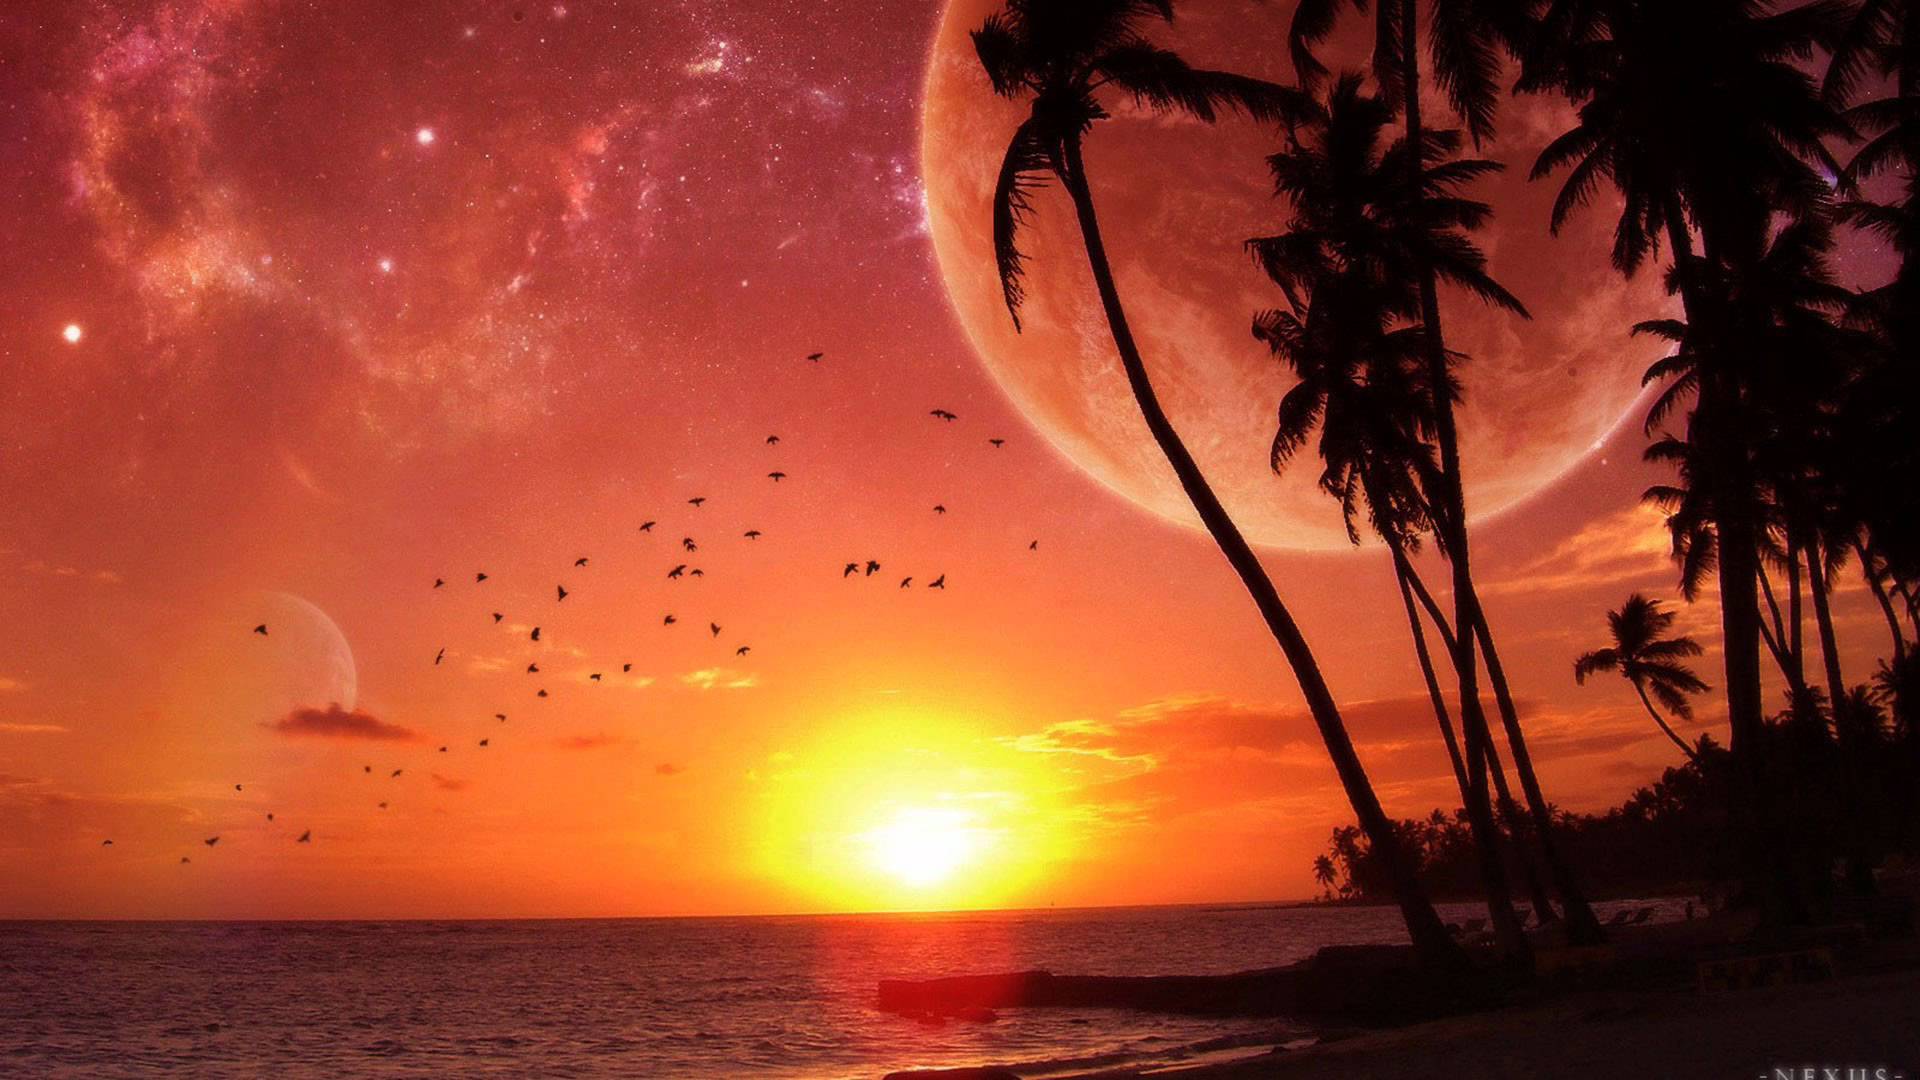 Tropical Sunset Wallpaper For Pc & Mac, Tablet, Laptop